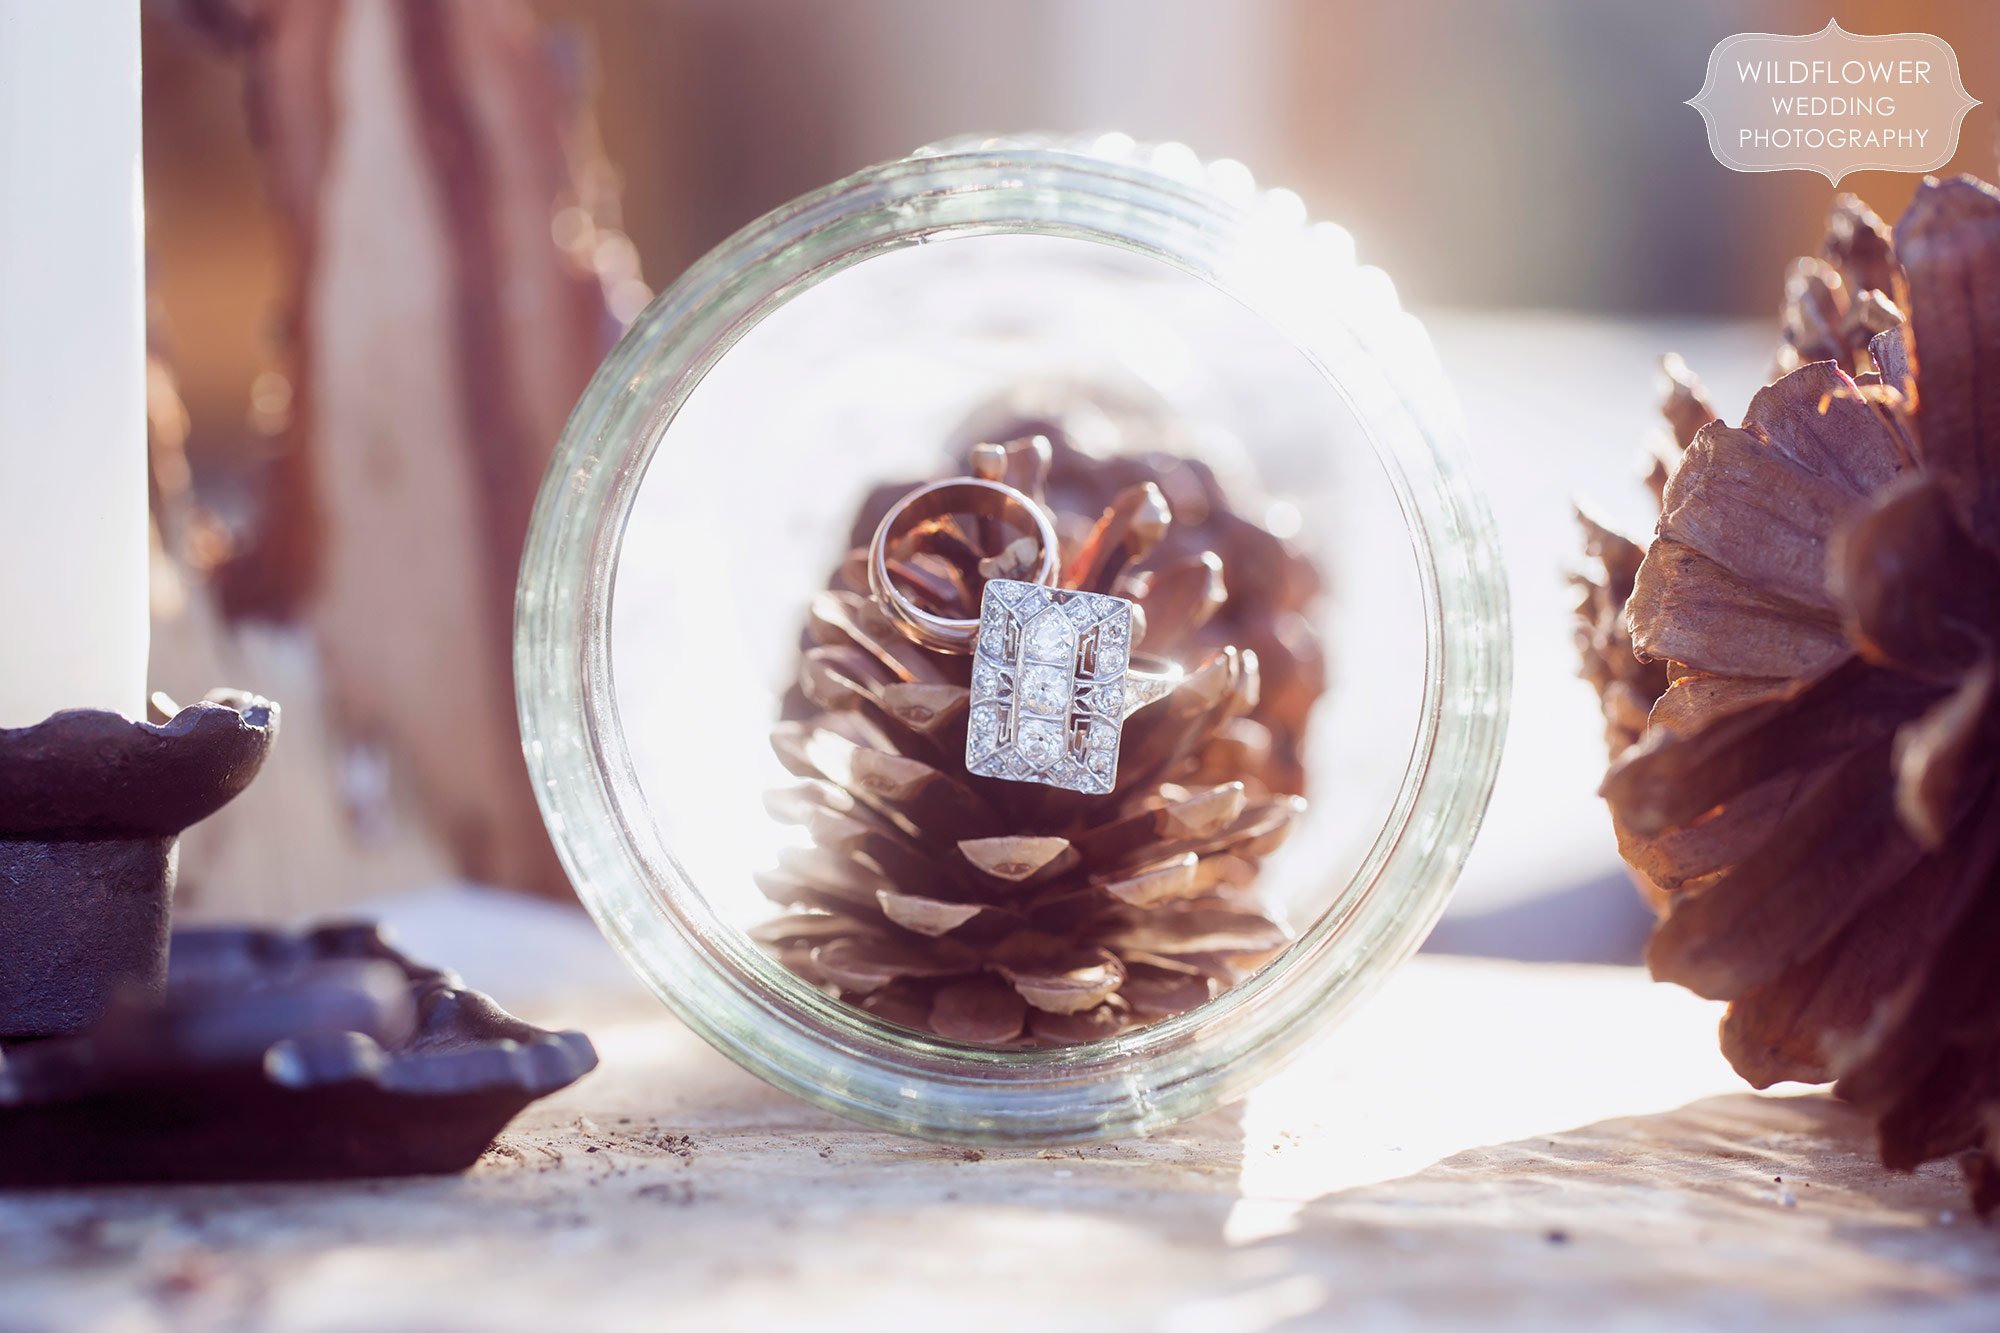 Fine art style photo of the wedding rings in an antique jar with pine cones for this January wedding.